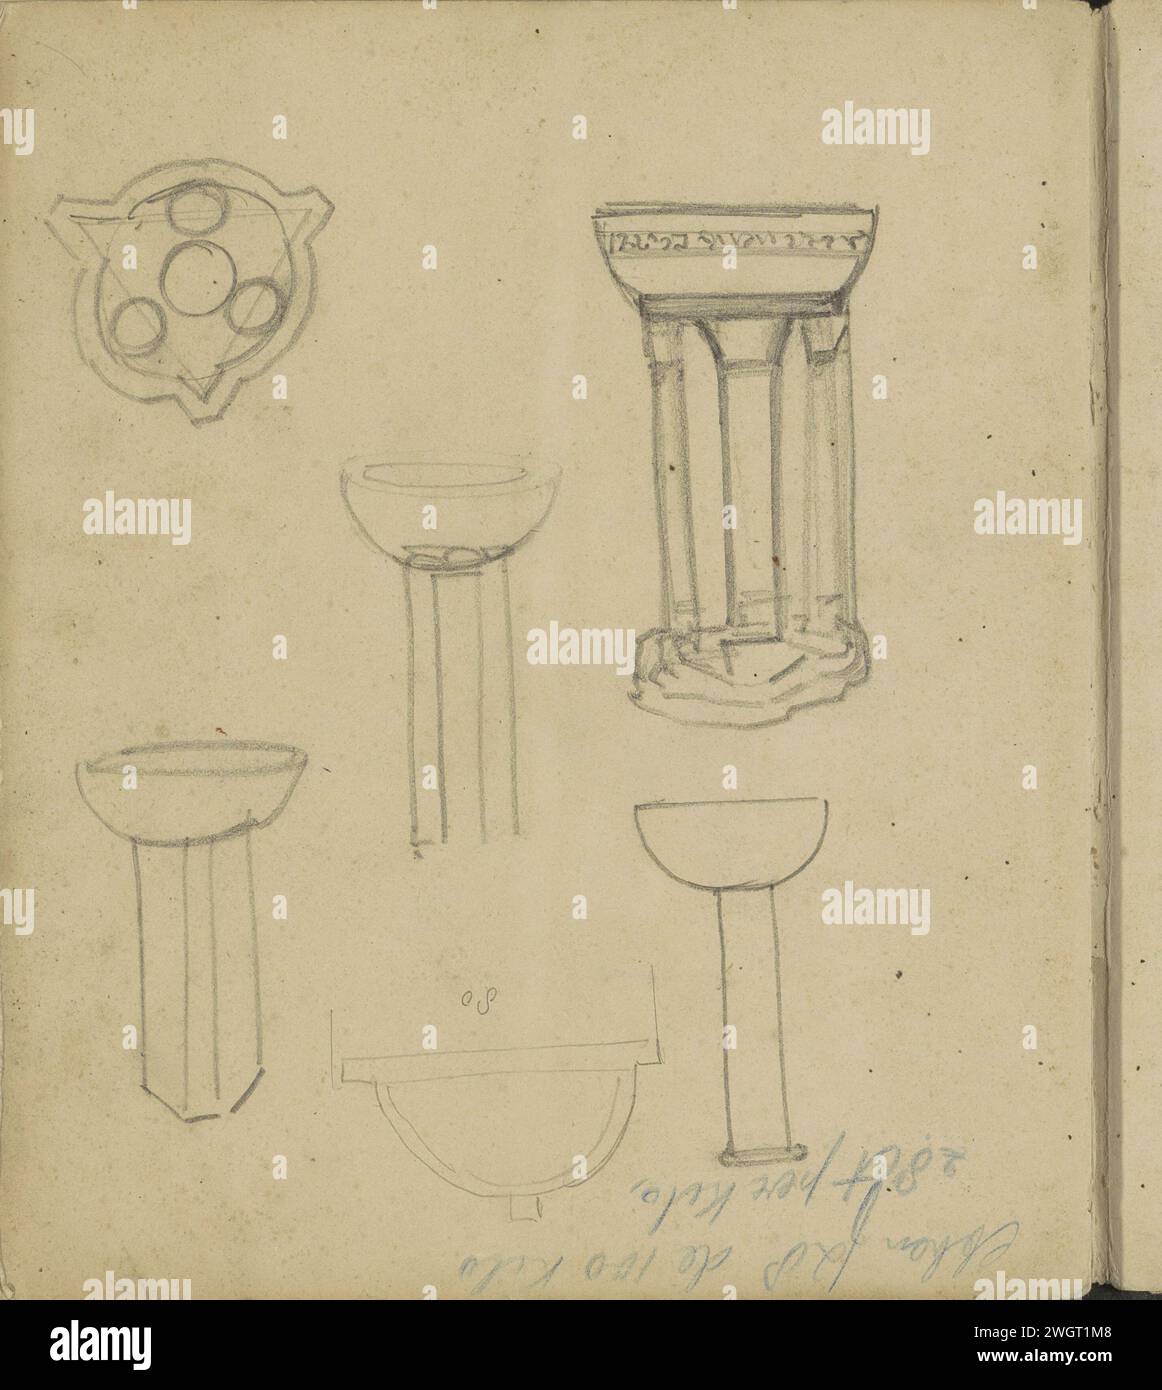 Designs for a baptismal font, c. 1905 - c. 1906  Page 30 Verso from a sketchbook with 30 sheets.  paper. pencil  baptismal font Stock Photo